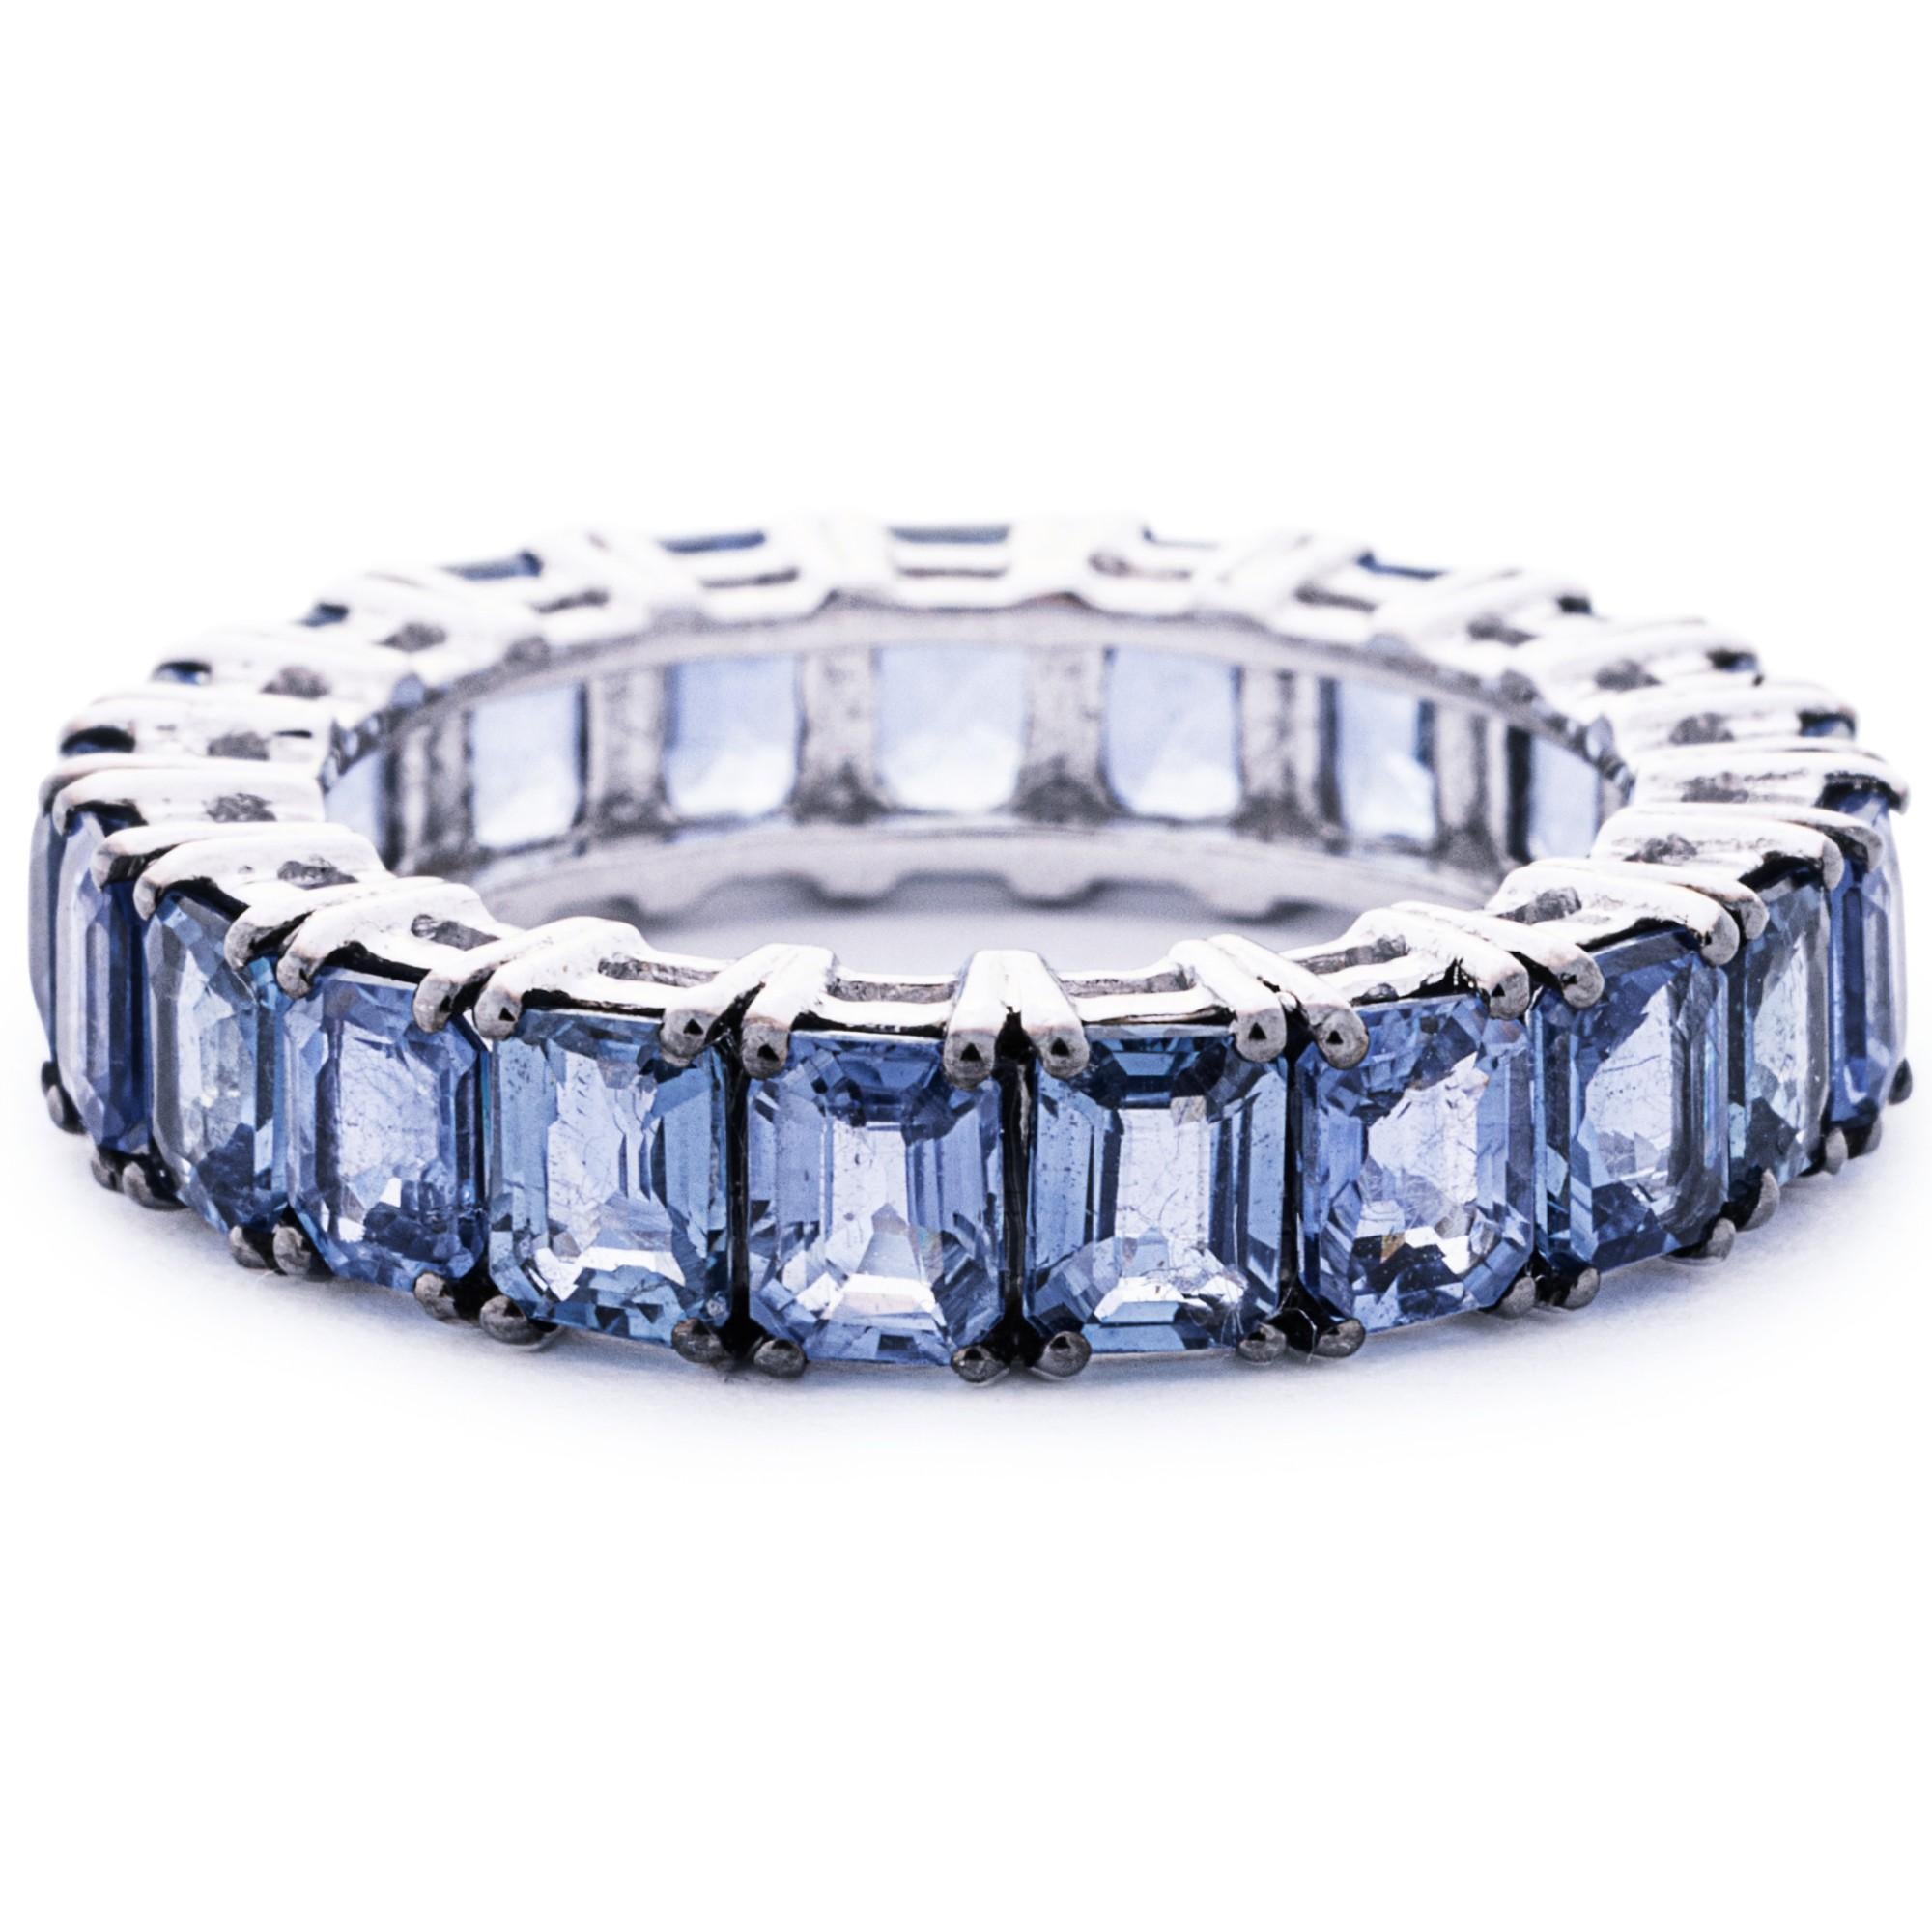 Alex Jona Blue Sapphire 18 Karat White Gold Eternity Band Ring In New Condition For Sale In Torino, IT